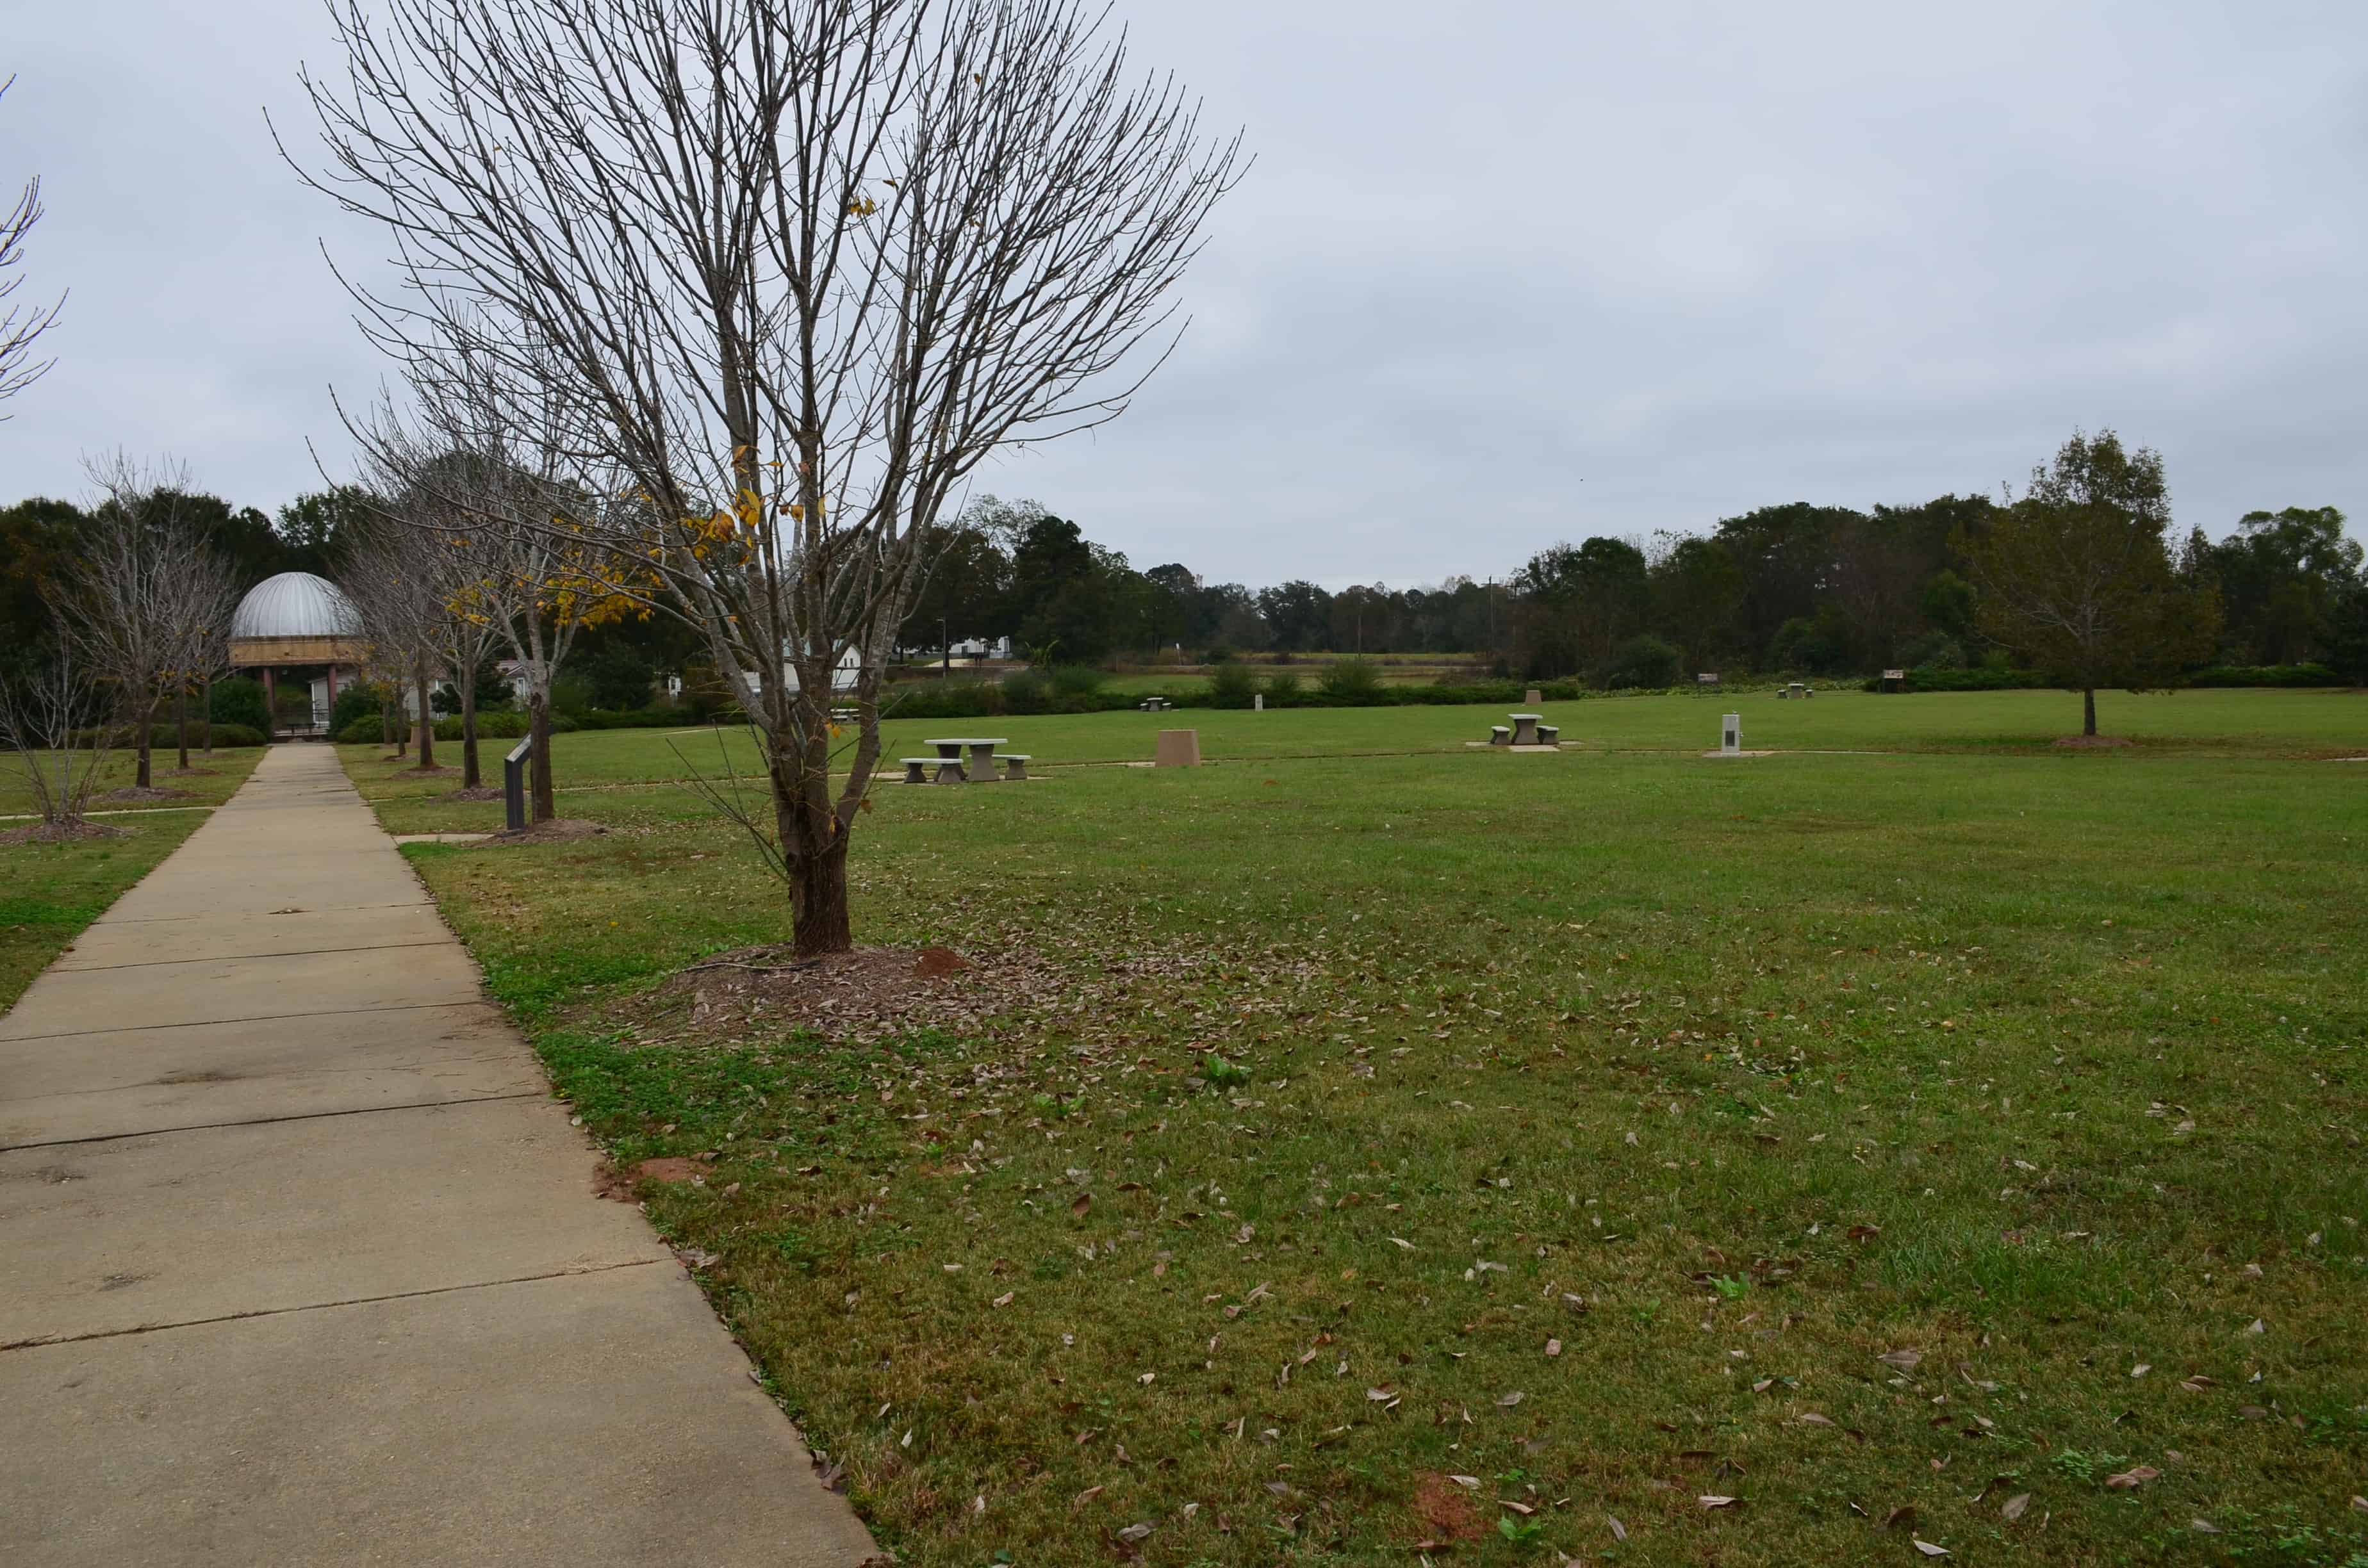 Site of tent city at the Lowndes Interpretive Center on the Selma to Montgomery National Historic Trail in Alabama